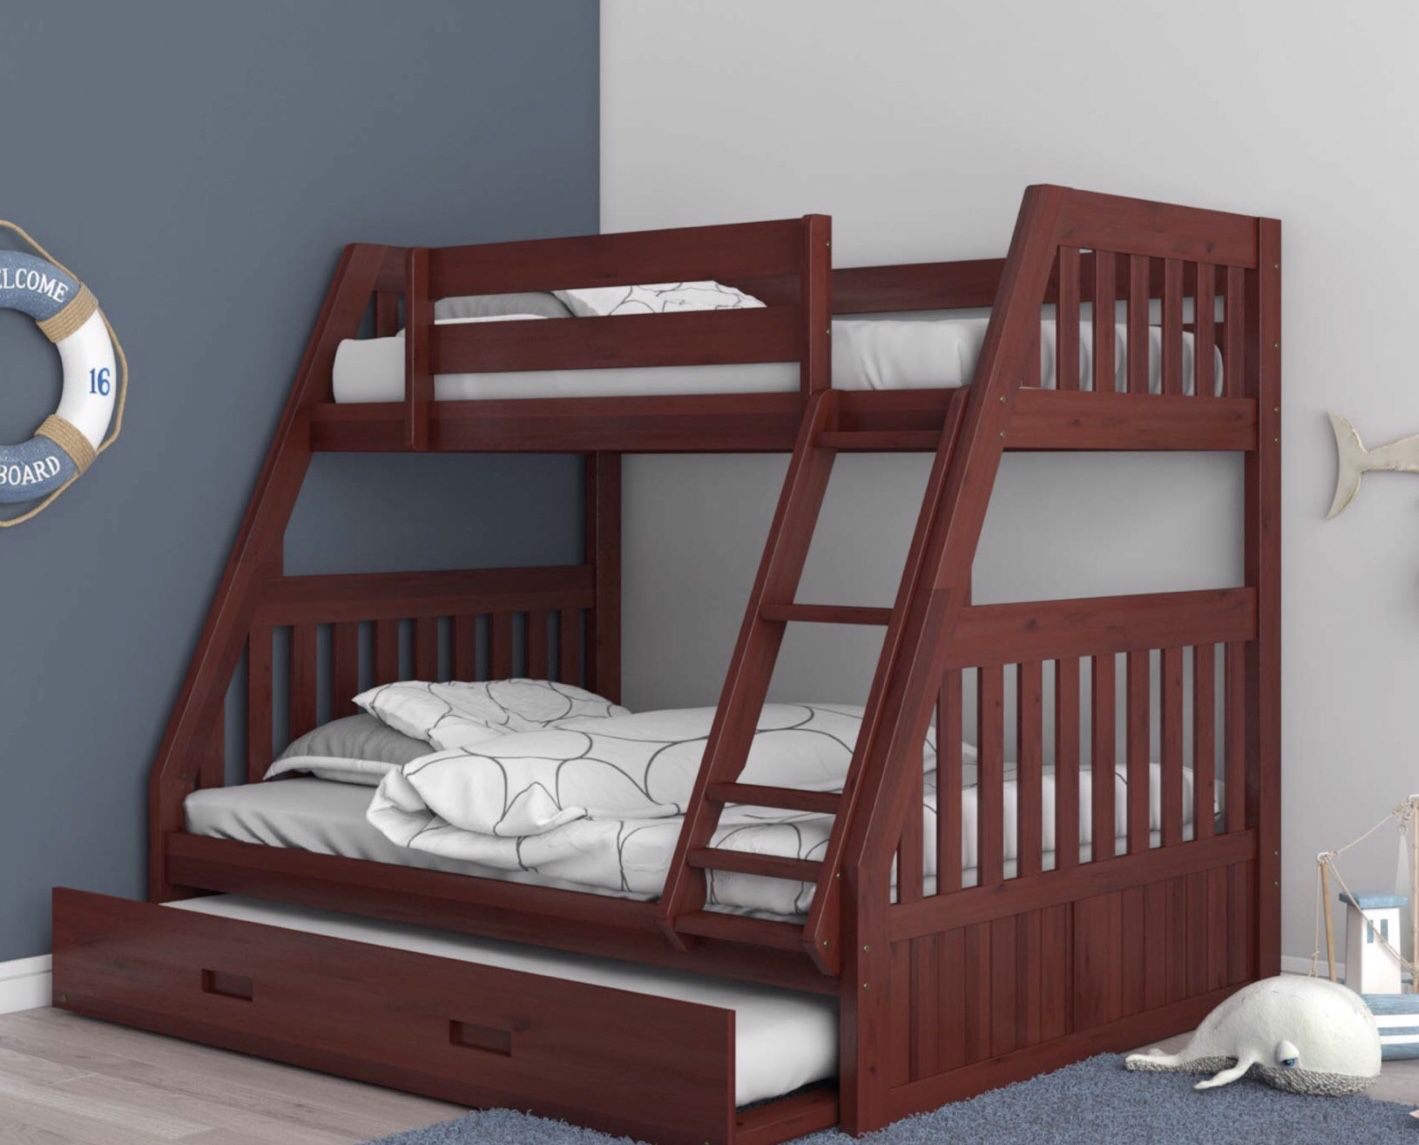 NEW BUNK BED FULL TWIN WITH TRUNDLE BED AND NEW MATTRESS INCLUDED